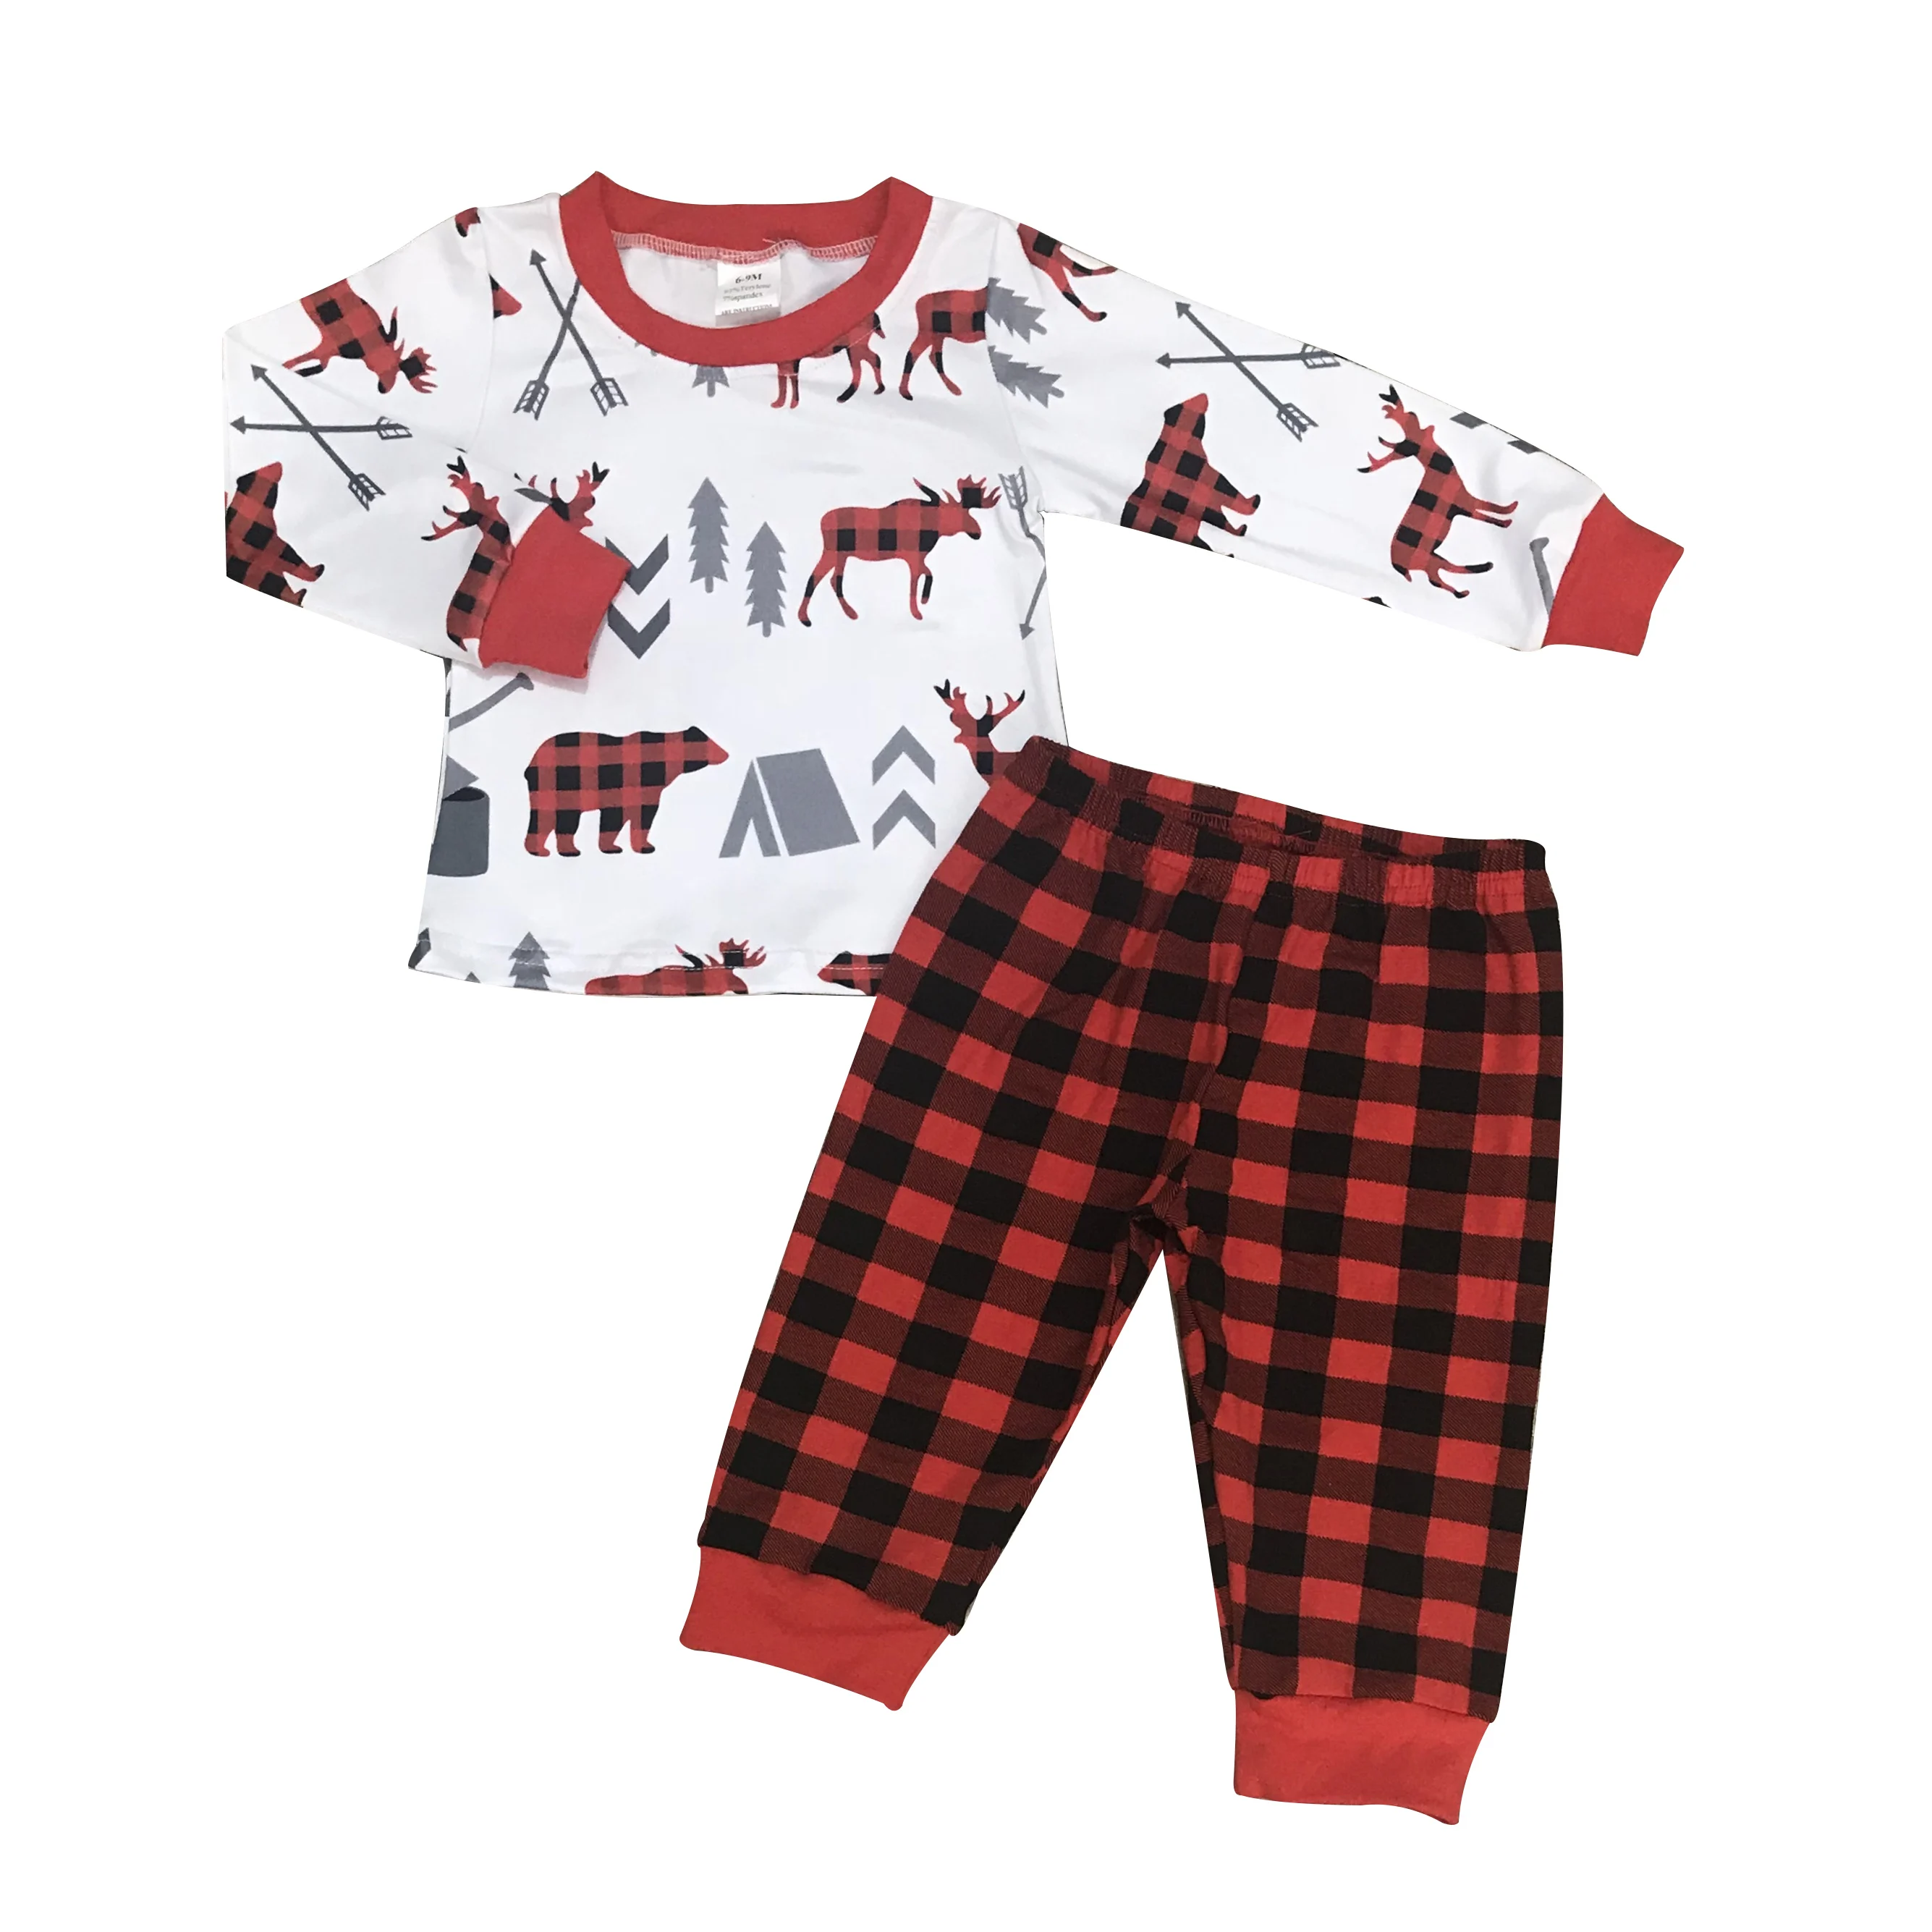 

Fall Children Winter Clothes Baby Girl Clothing Sets Christmas style Kids plaid pants Boutique Outfits